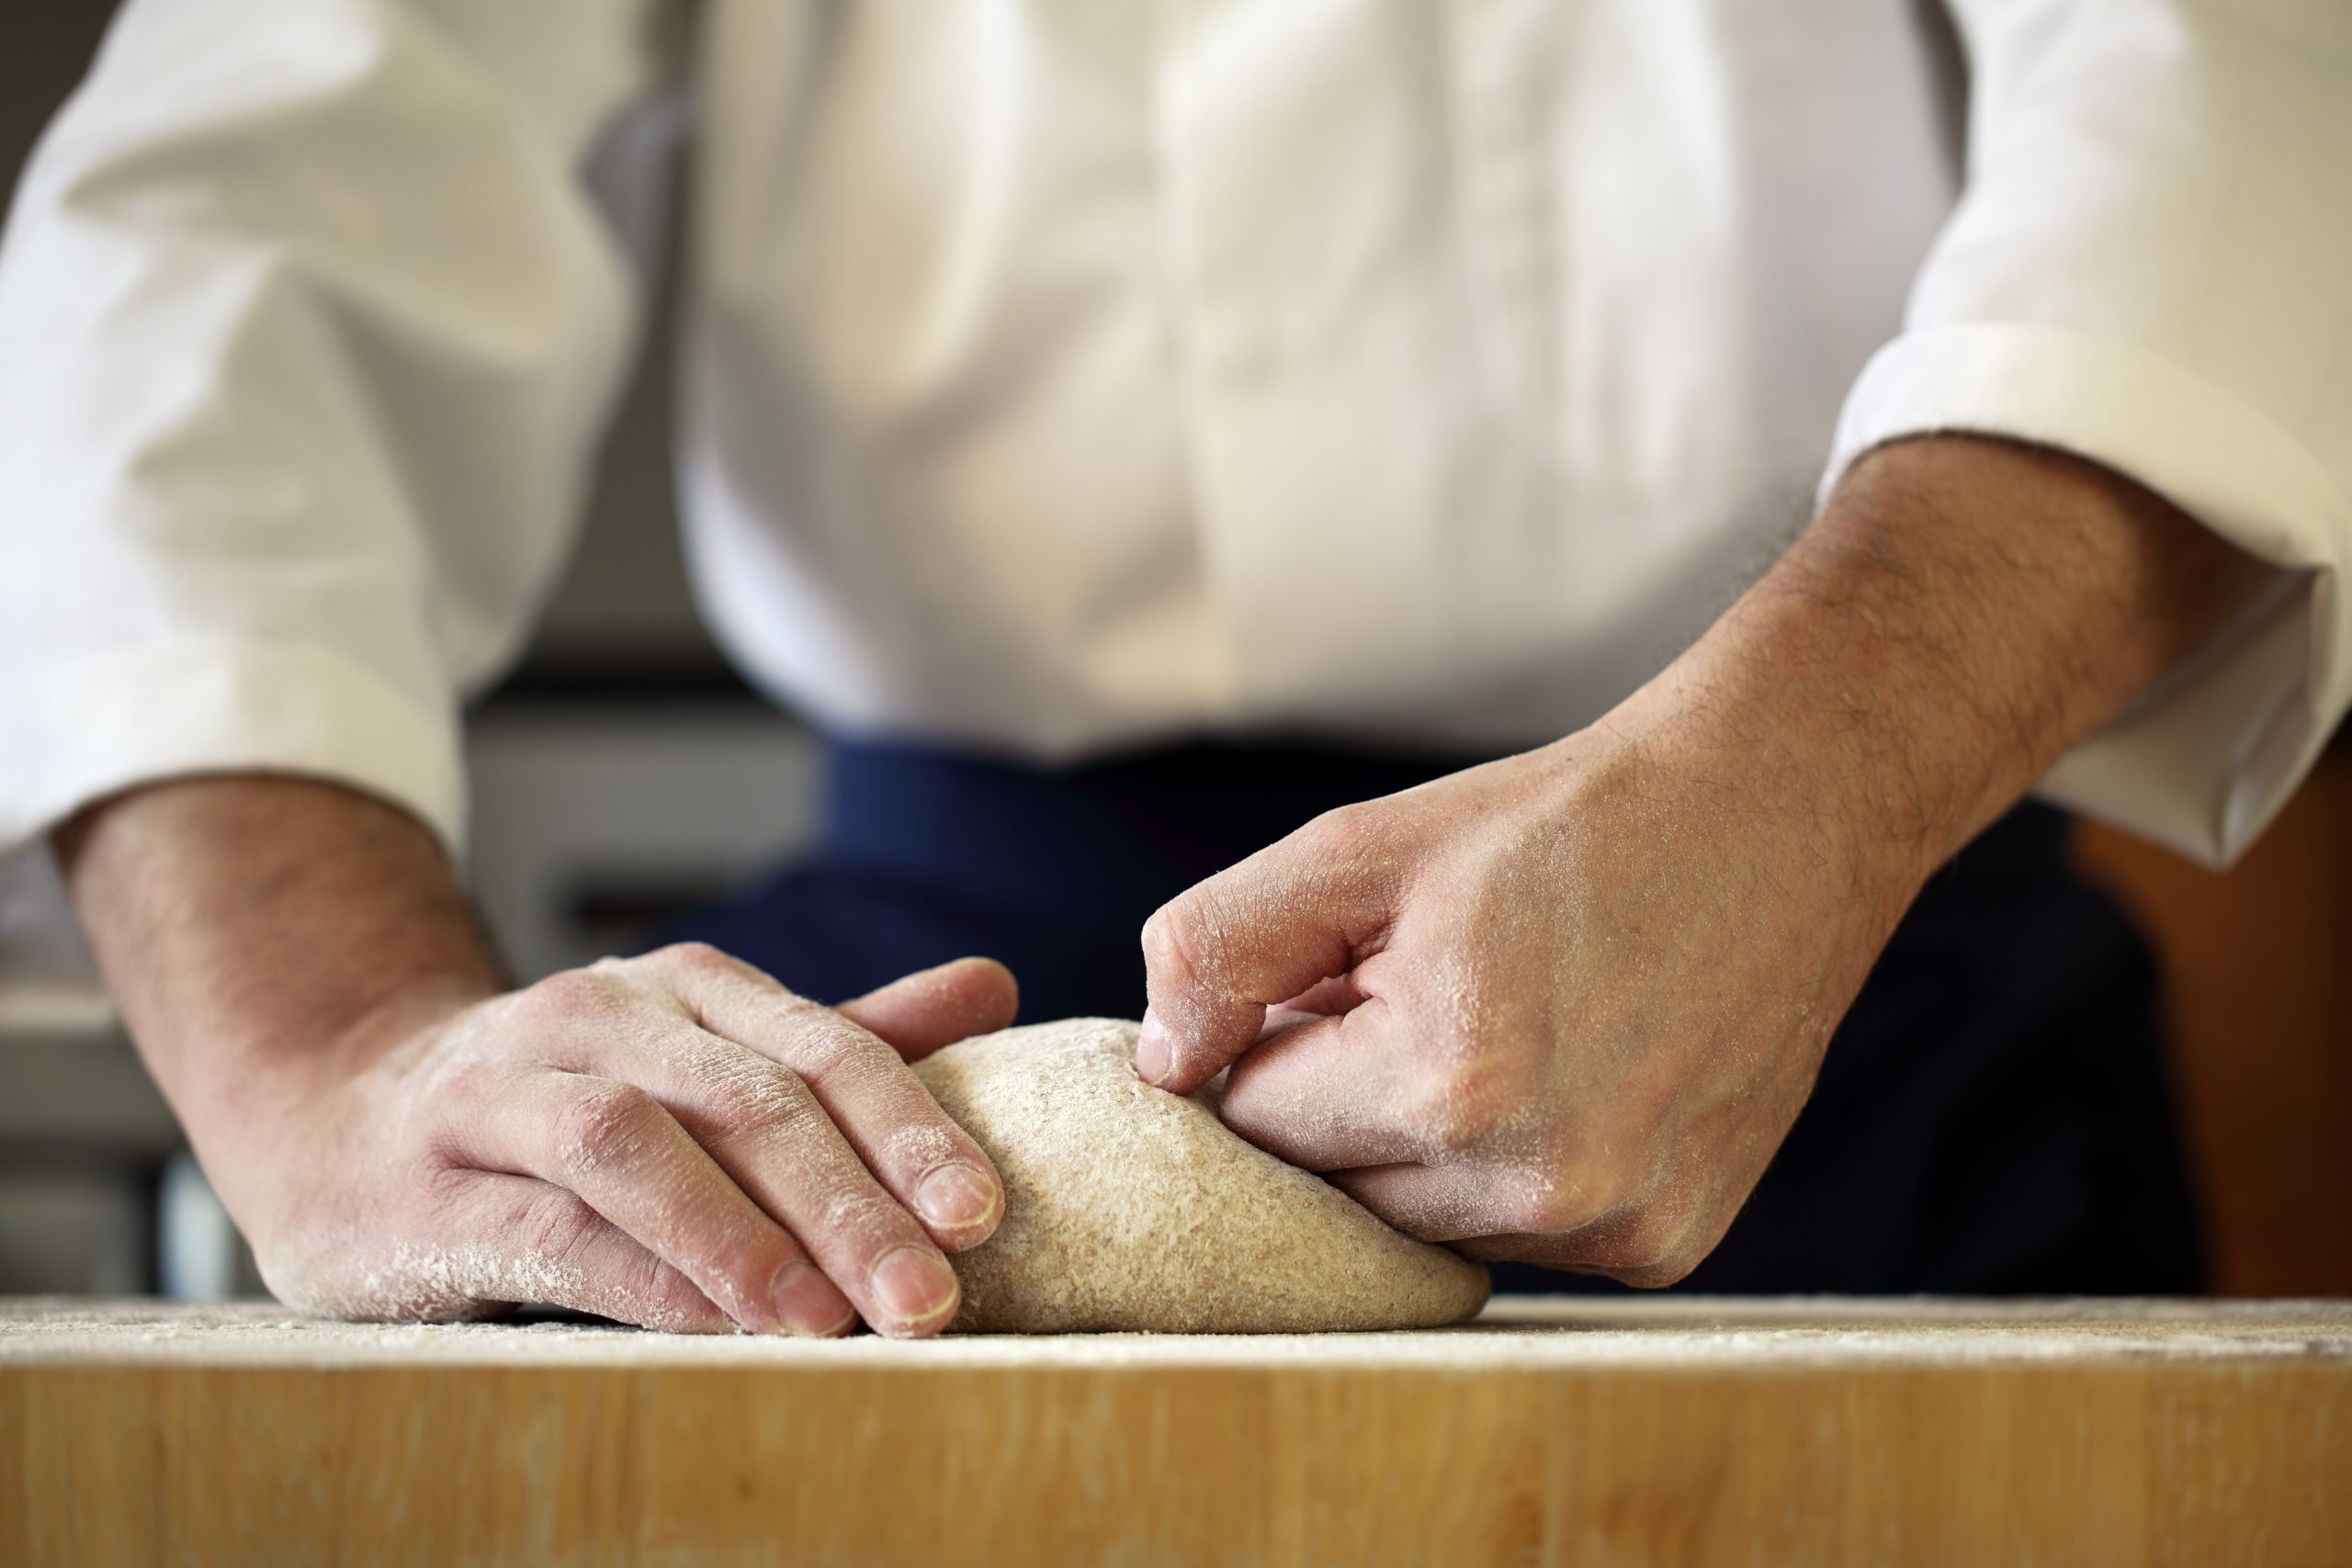 Making bread yeast dough, chef kneading in a bakery kitchen